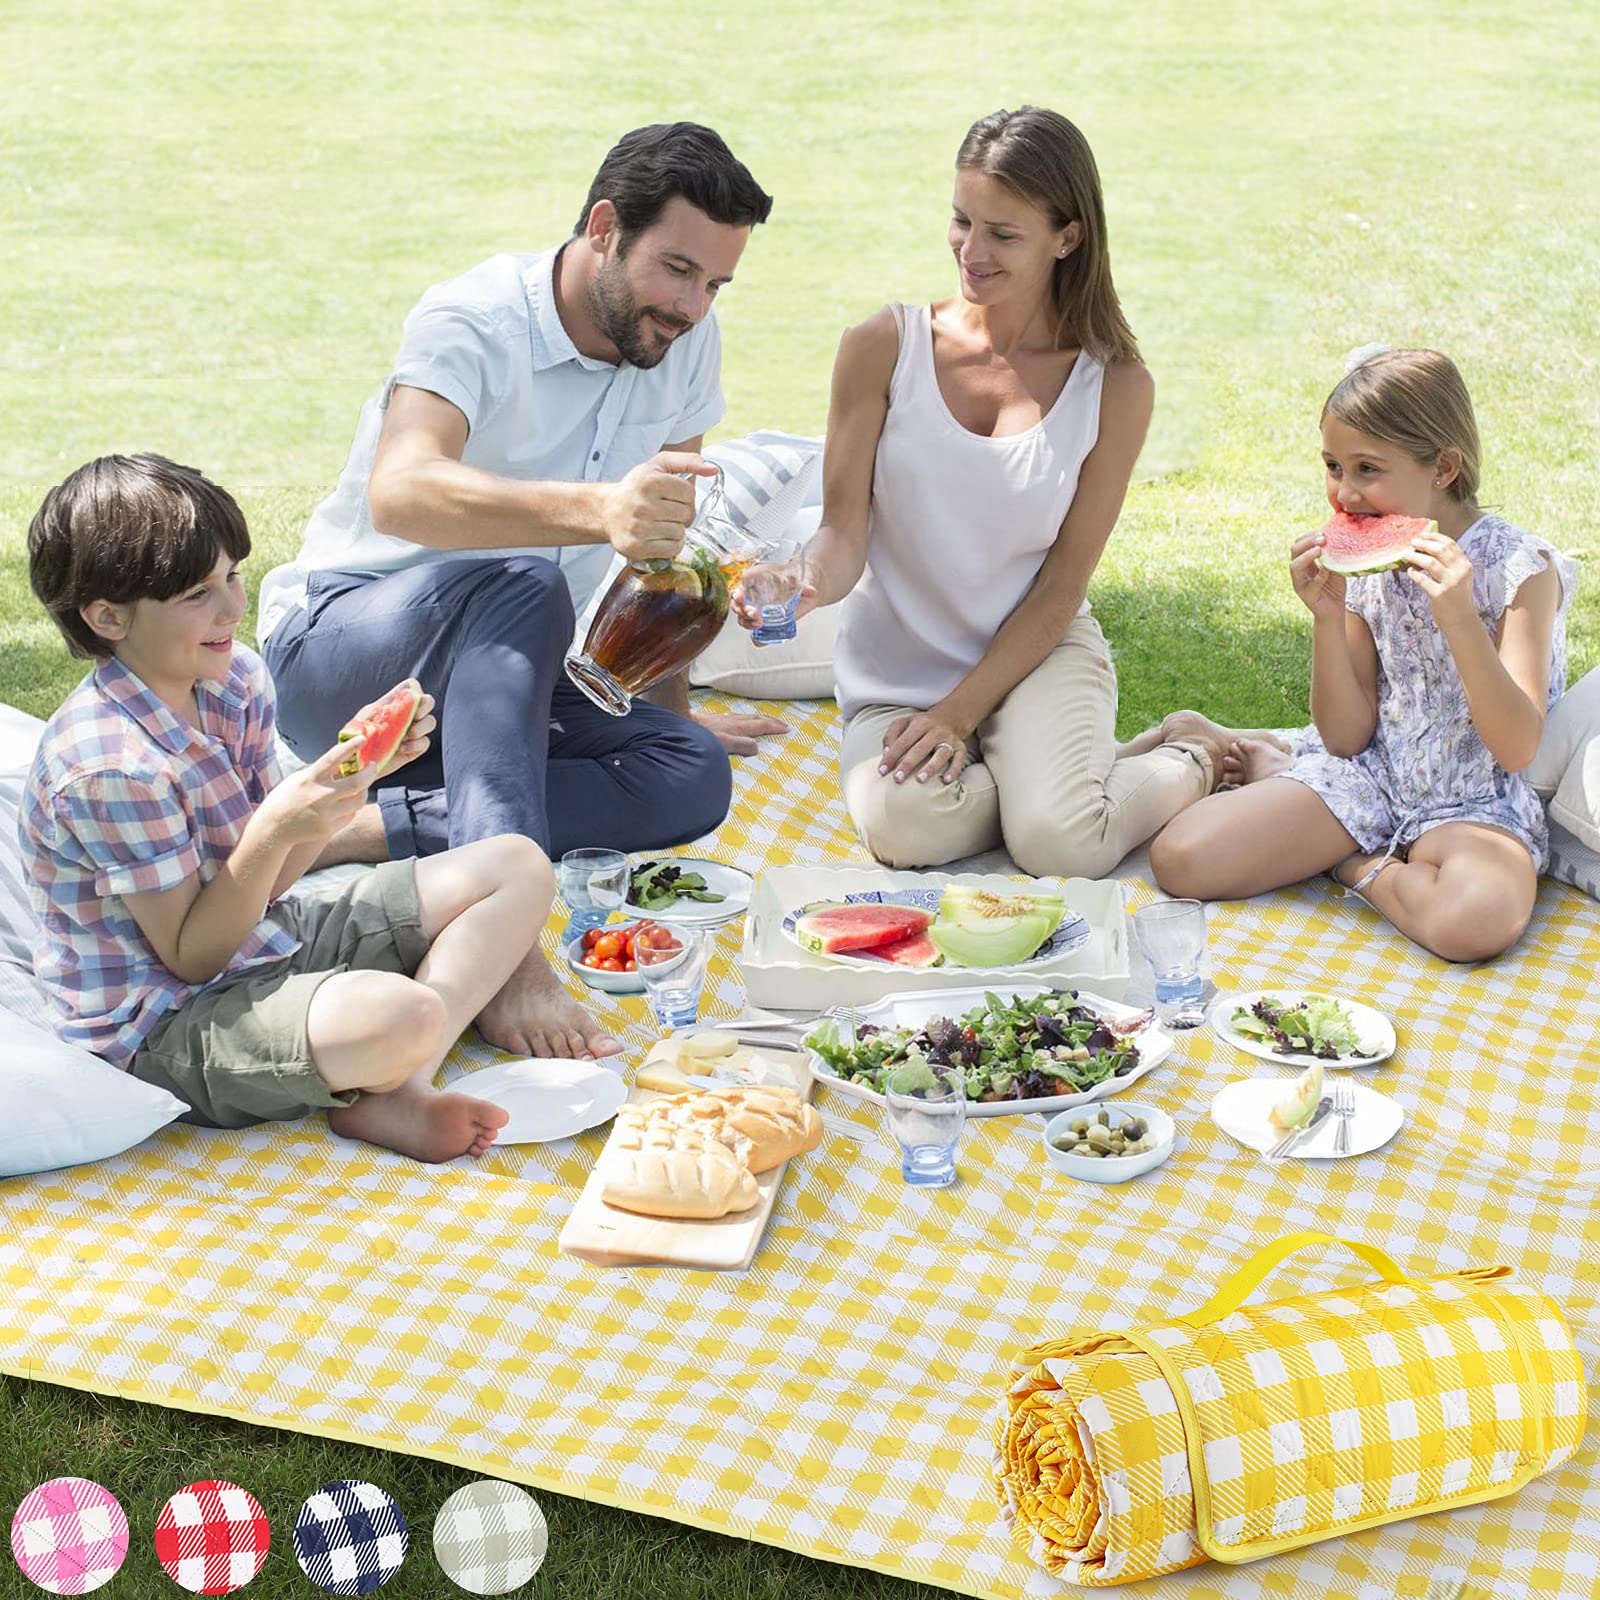 Thickened Outdoor Moisture-proof Tent Picnic Blanket for Camping, Beach, Park KGORGE Store